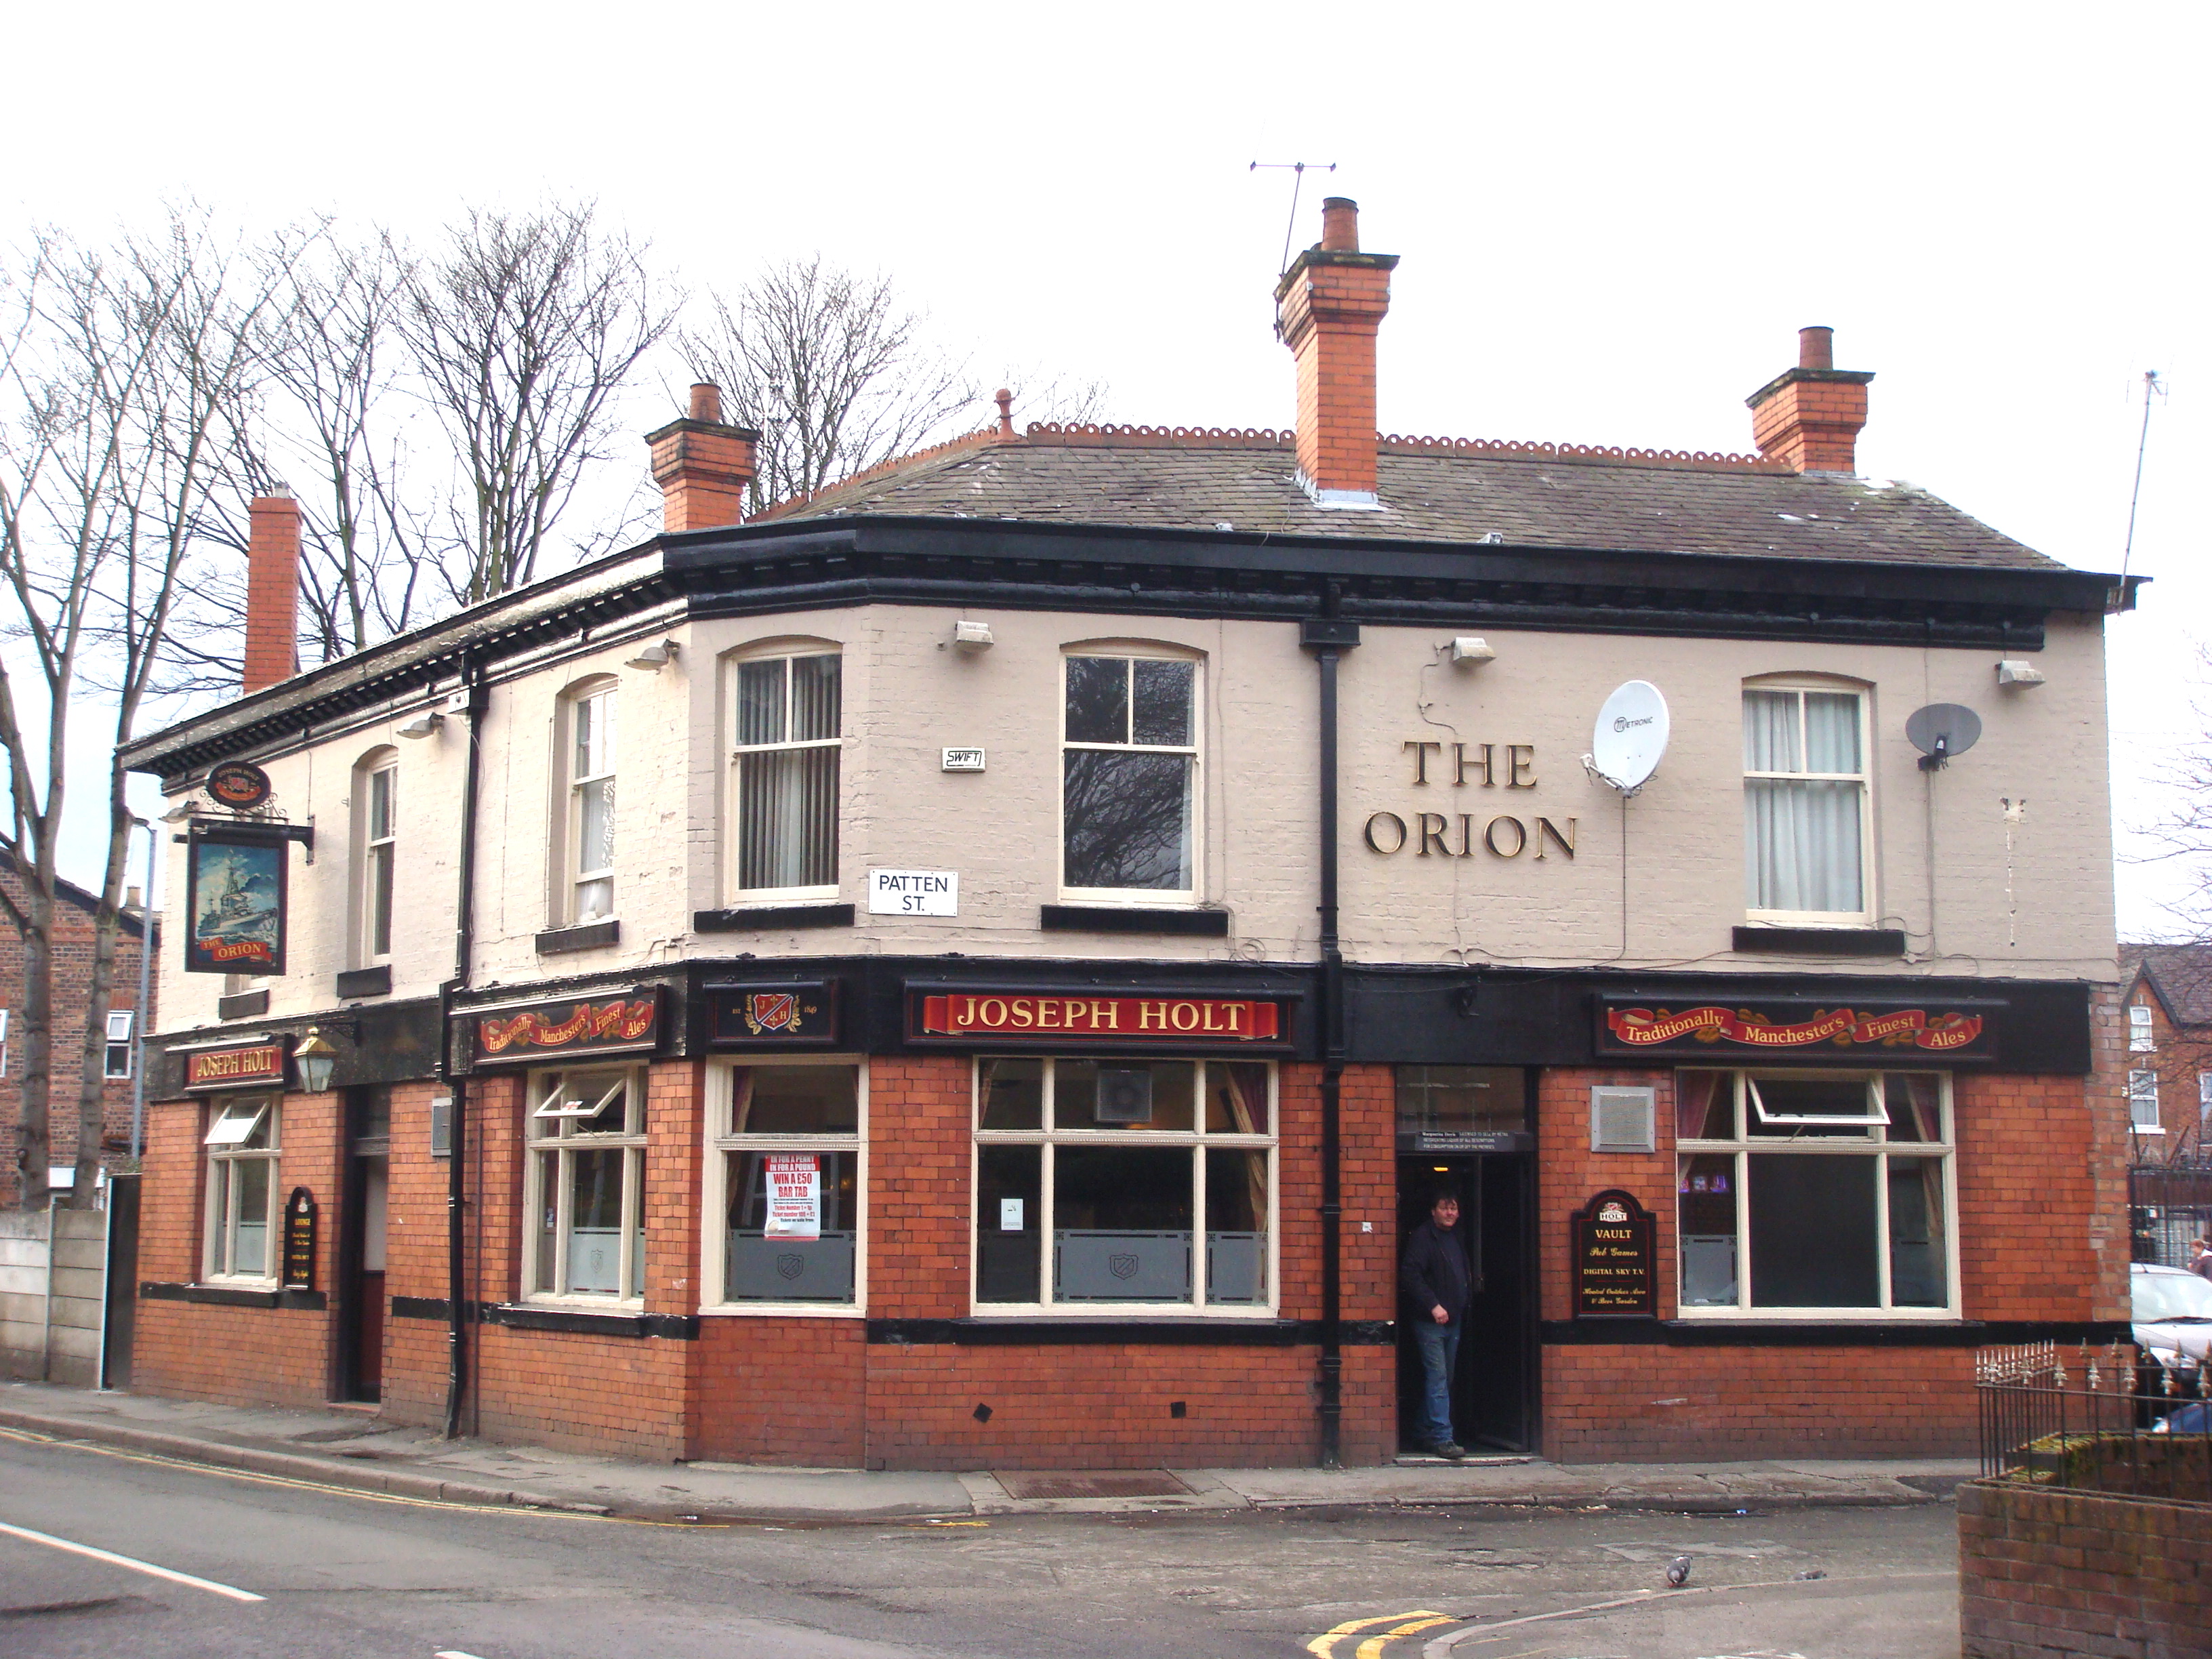 The Orion public house, Withington